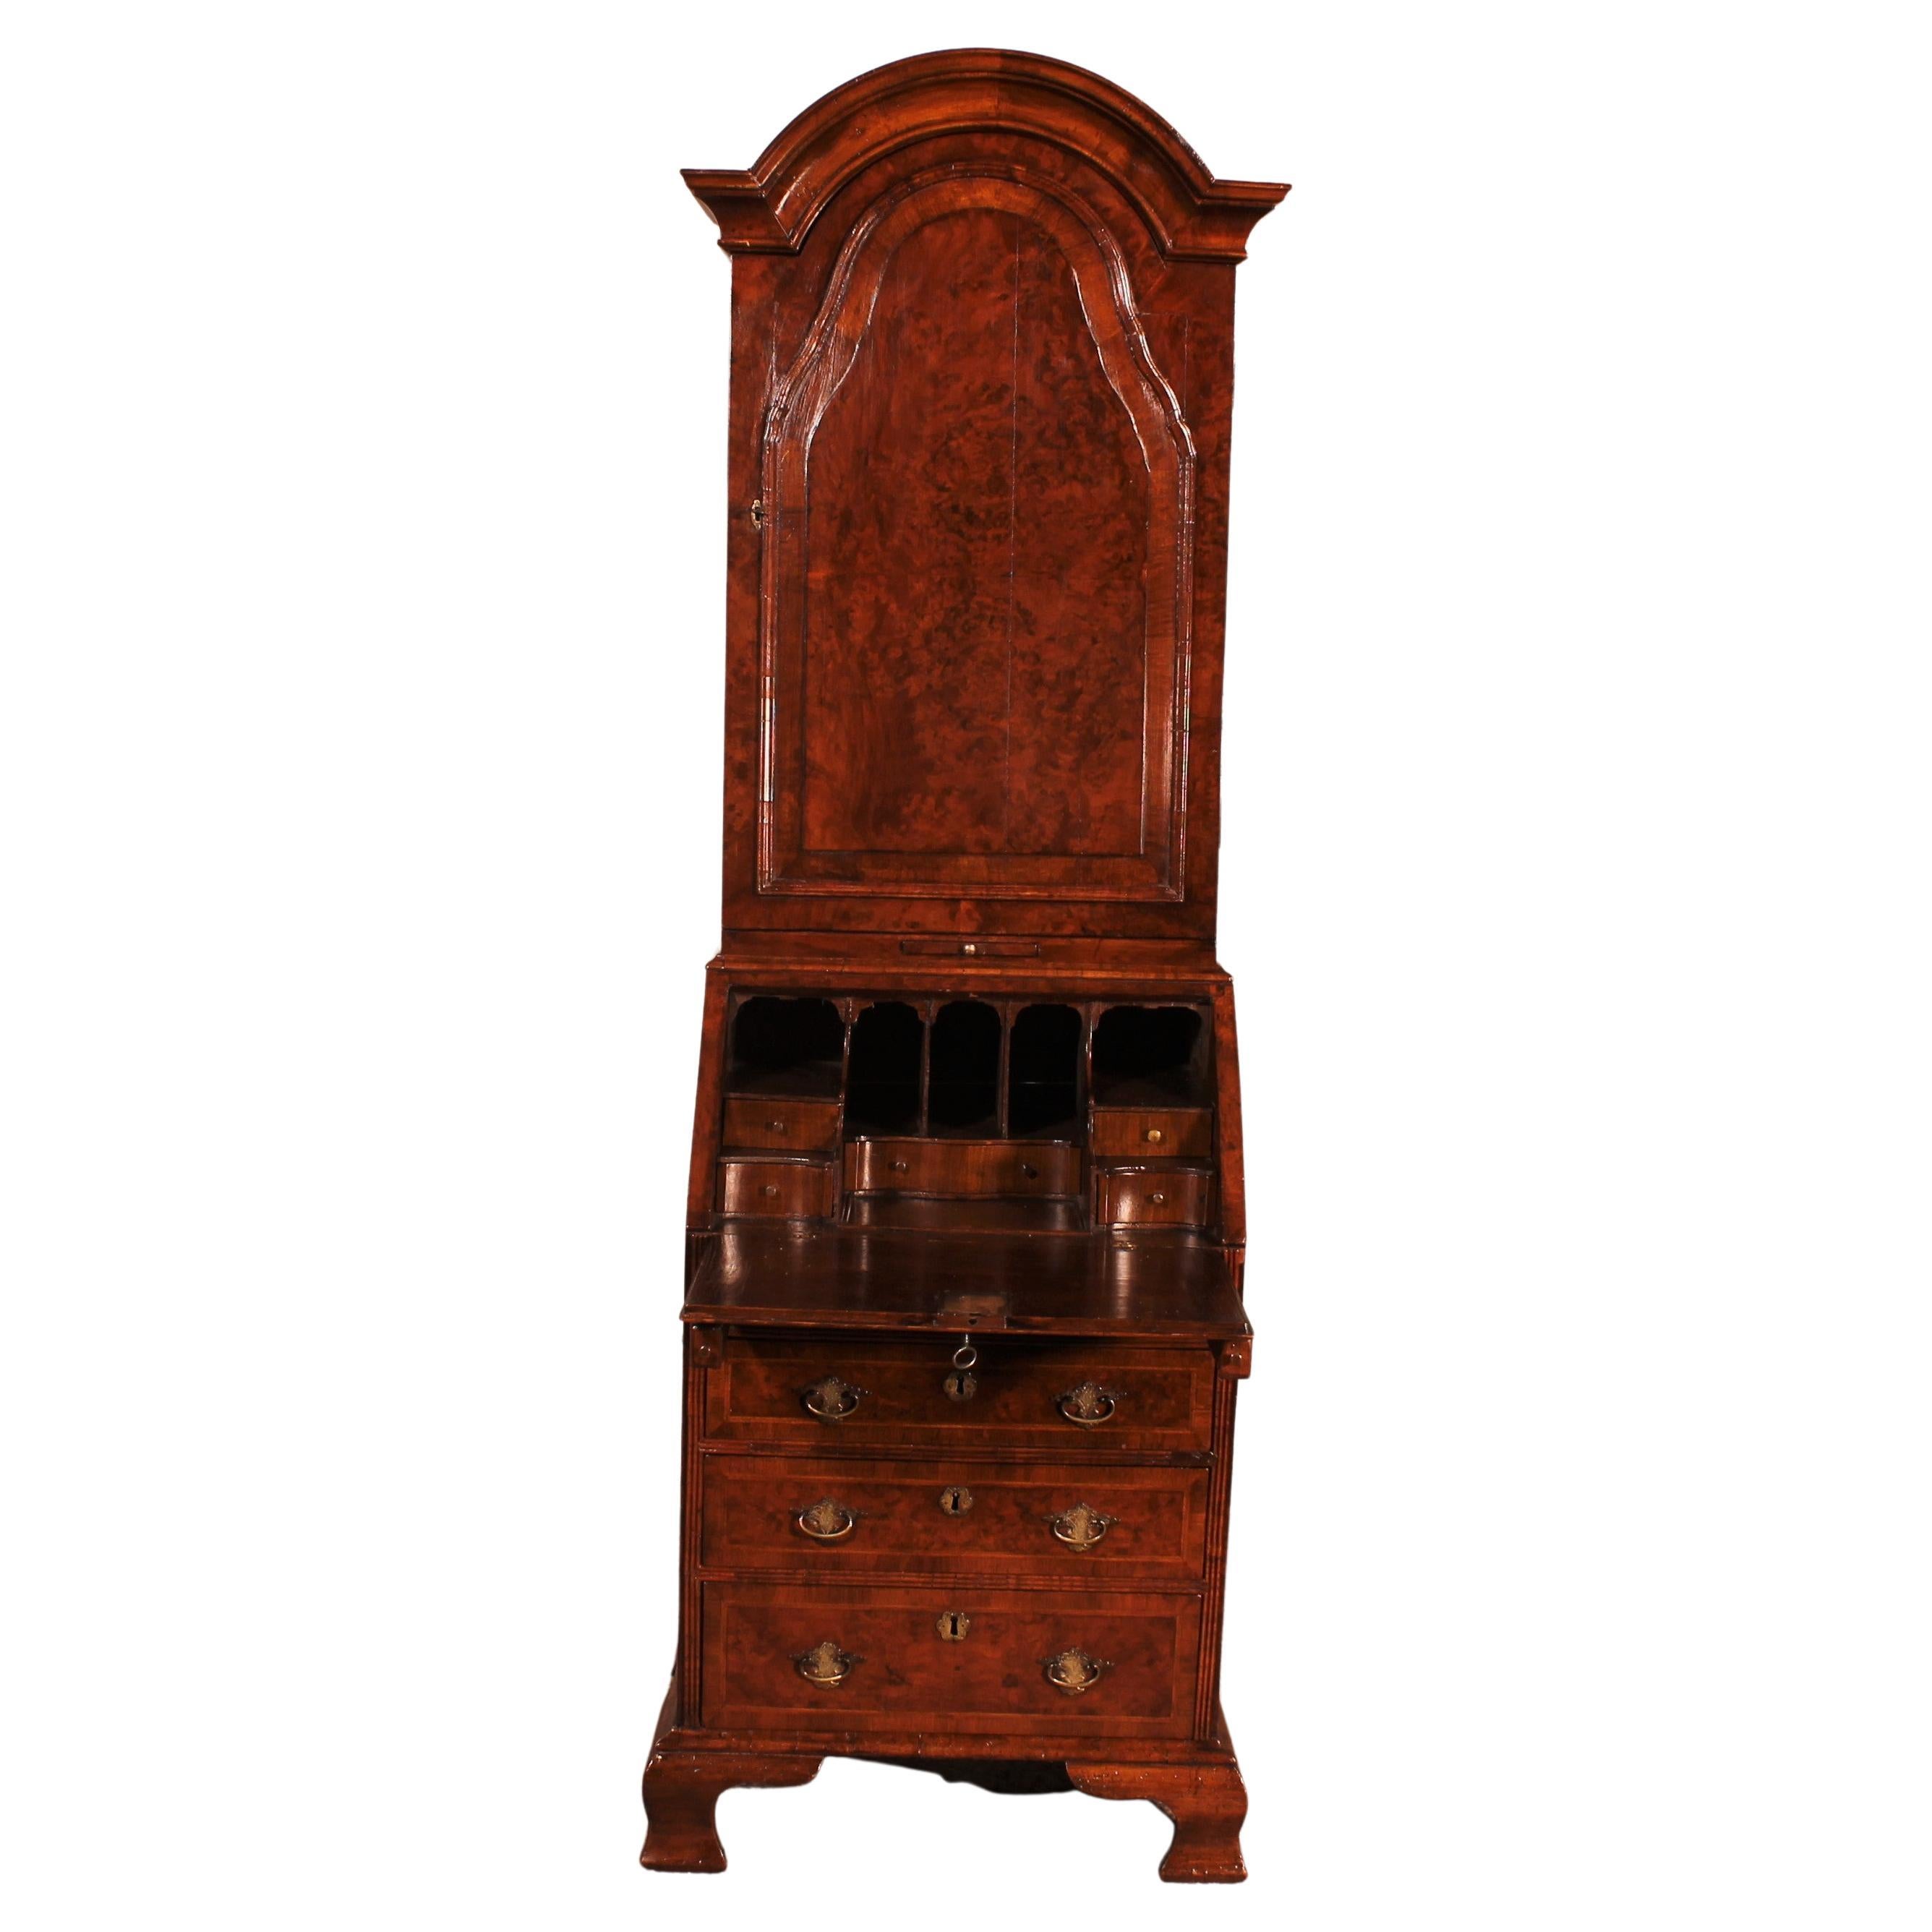 Small Secretary or Cabinet in Burl Walnut with Dome, 18 ° Century For Sale